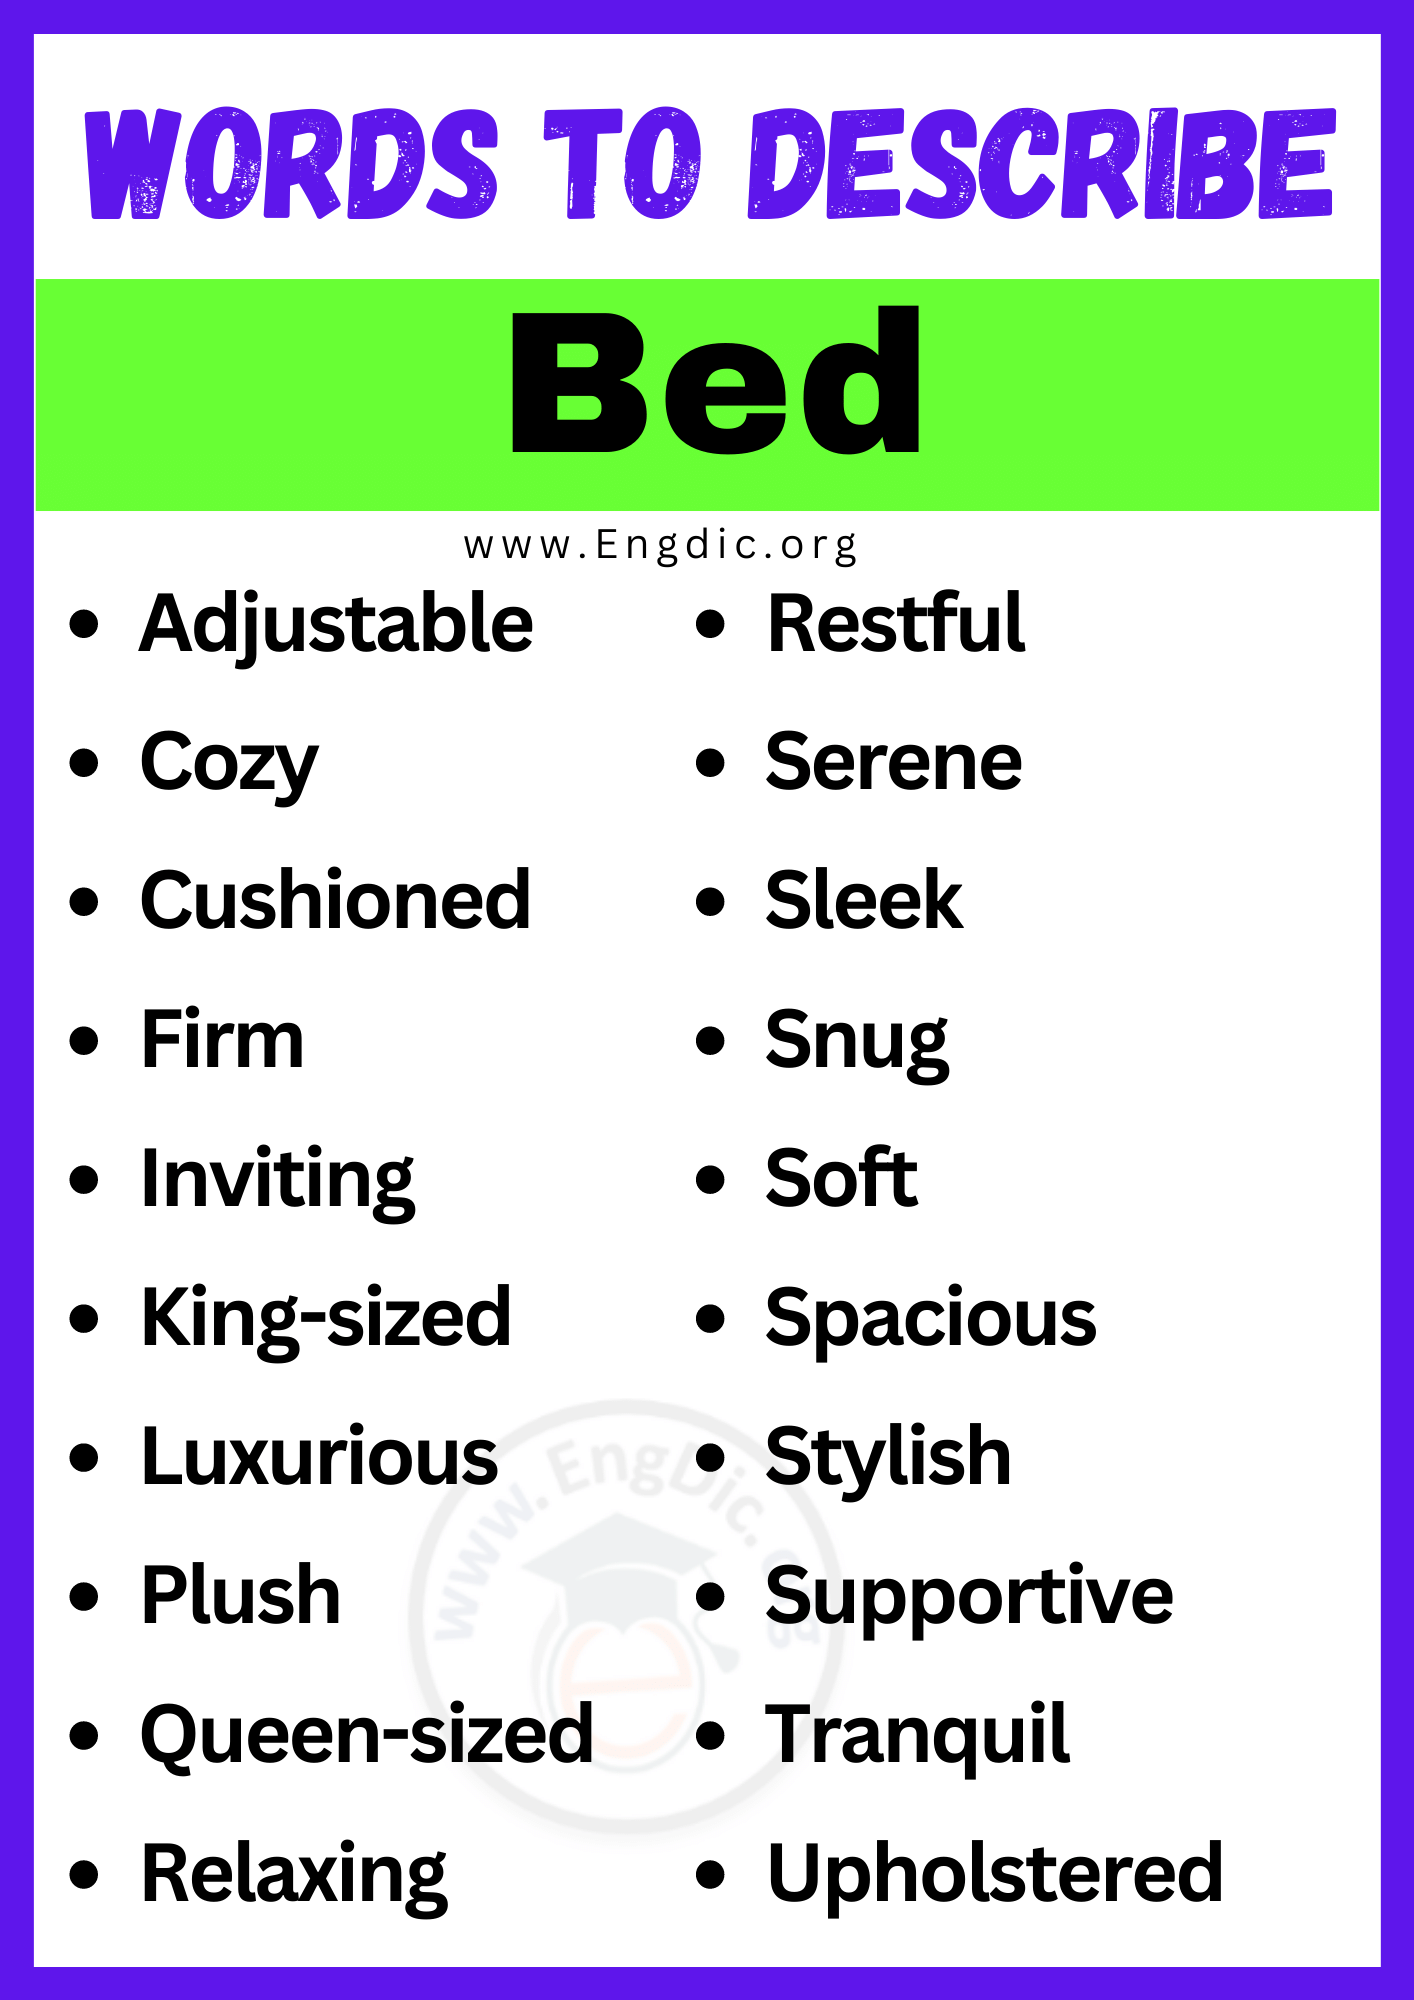 Words to Describe Bed